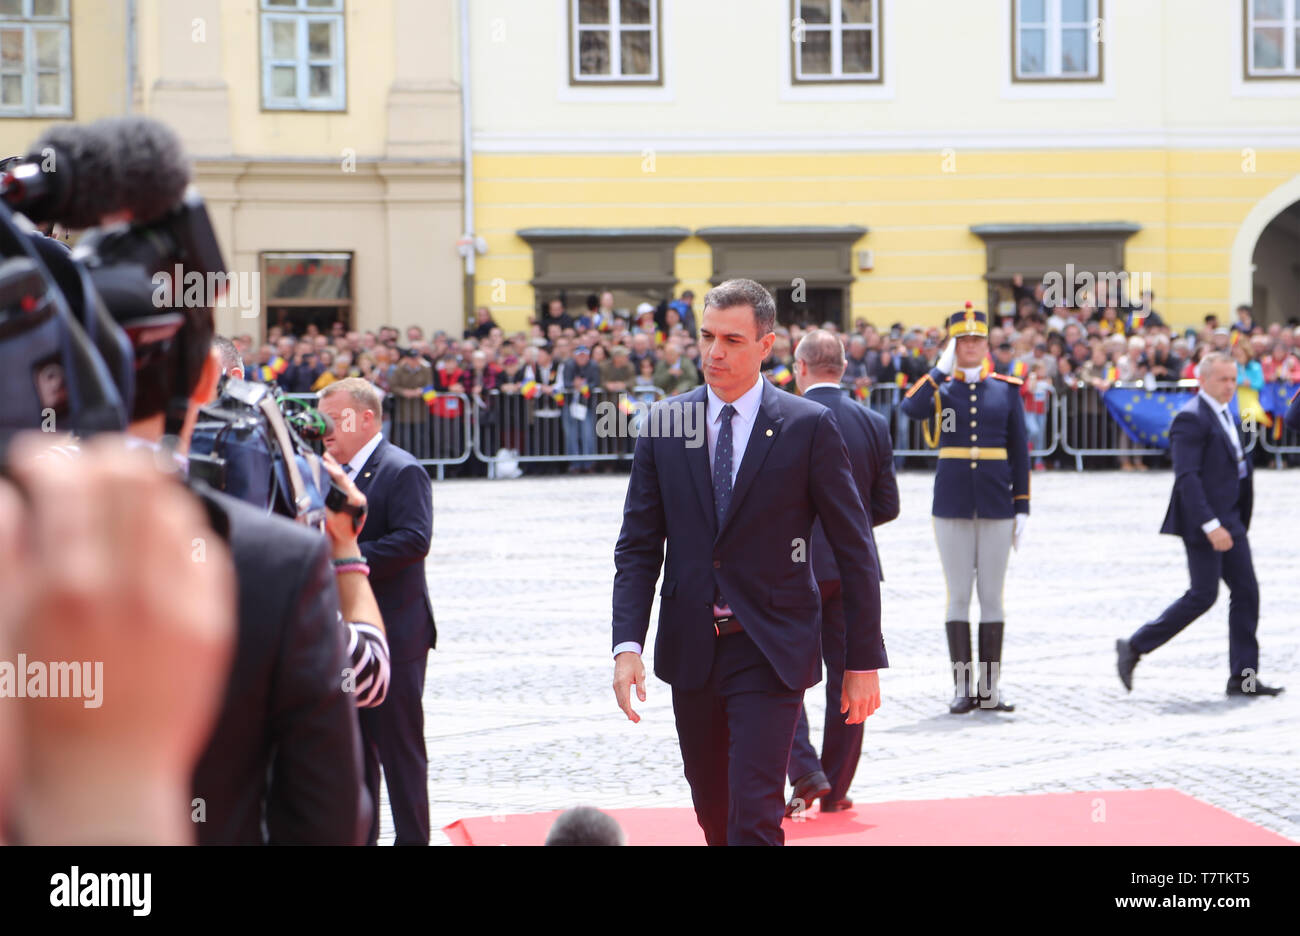 Sibiu, Romania. 9th May, 2019. Spain's Prime Minister Pedro Sanchez arrives in the Grand Square in front of the Sibiu City Hall to attend the European Union (EU) informal summit in Sibiu, Romania, May 9, 2019. The leaders of the EU member states on Thursday agreed on defending 'one Europe' and upholding the rules-based international order in their '10 commitments' declaration, made at an informal summit in Sibiu. Credit: Chen Jin/Xinhua/Alamy Live News Stock Photo